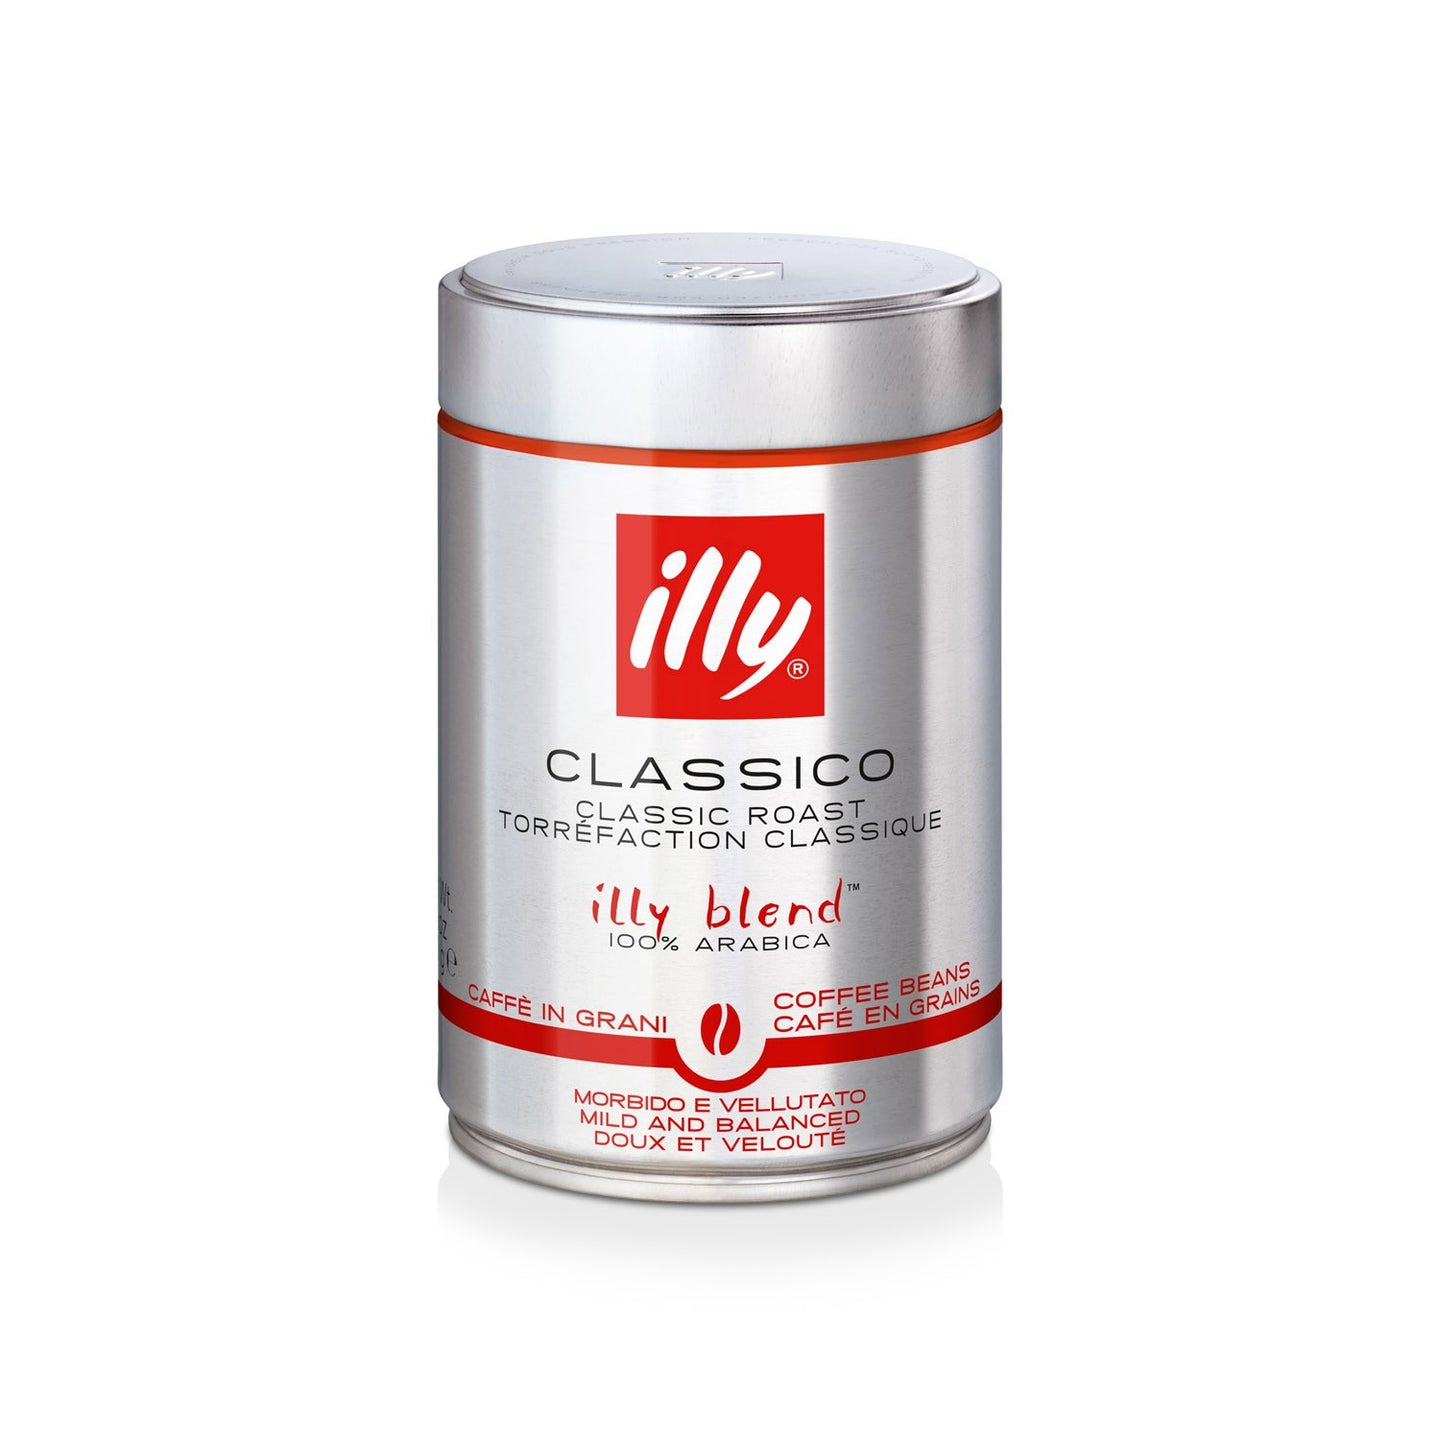 Illy Classico Classic Roast beans